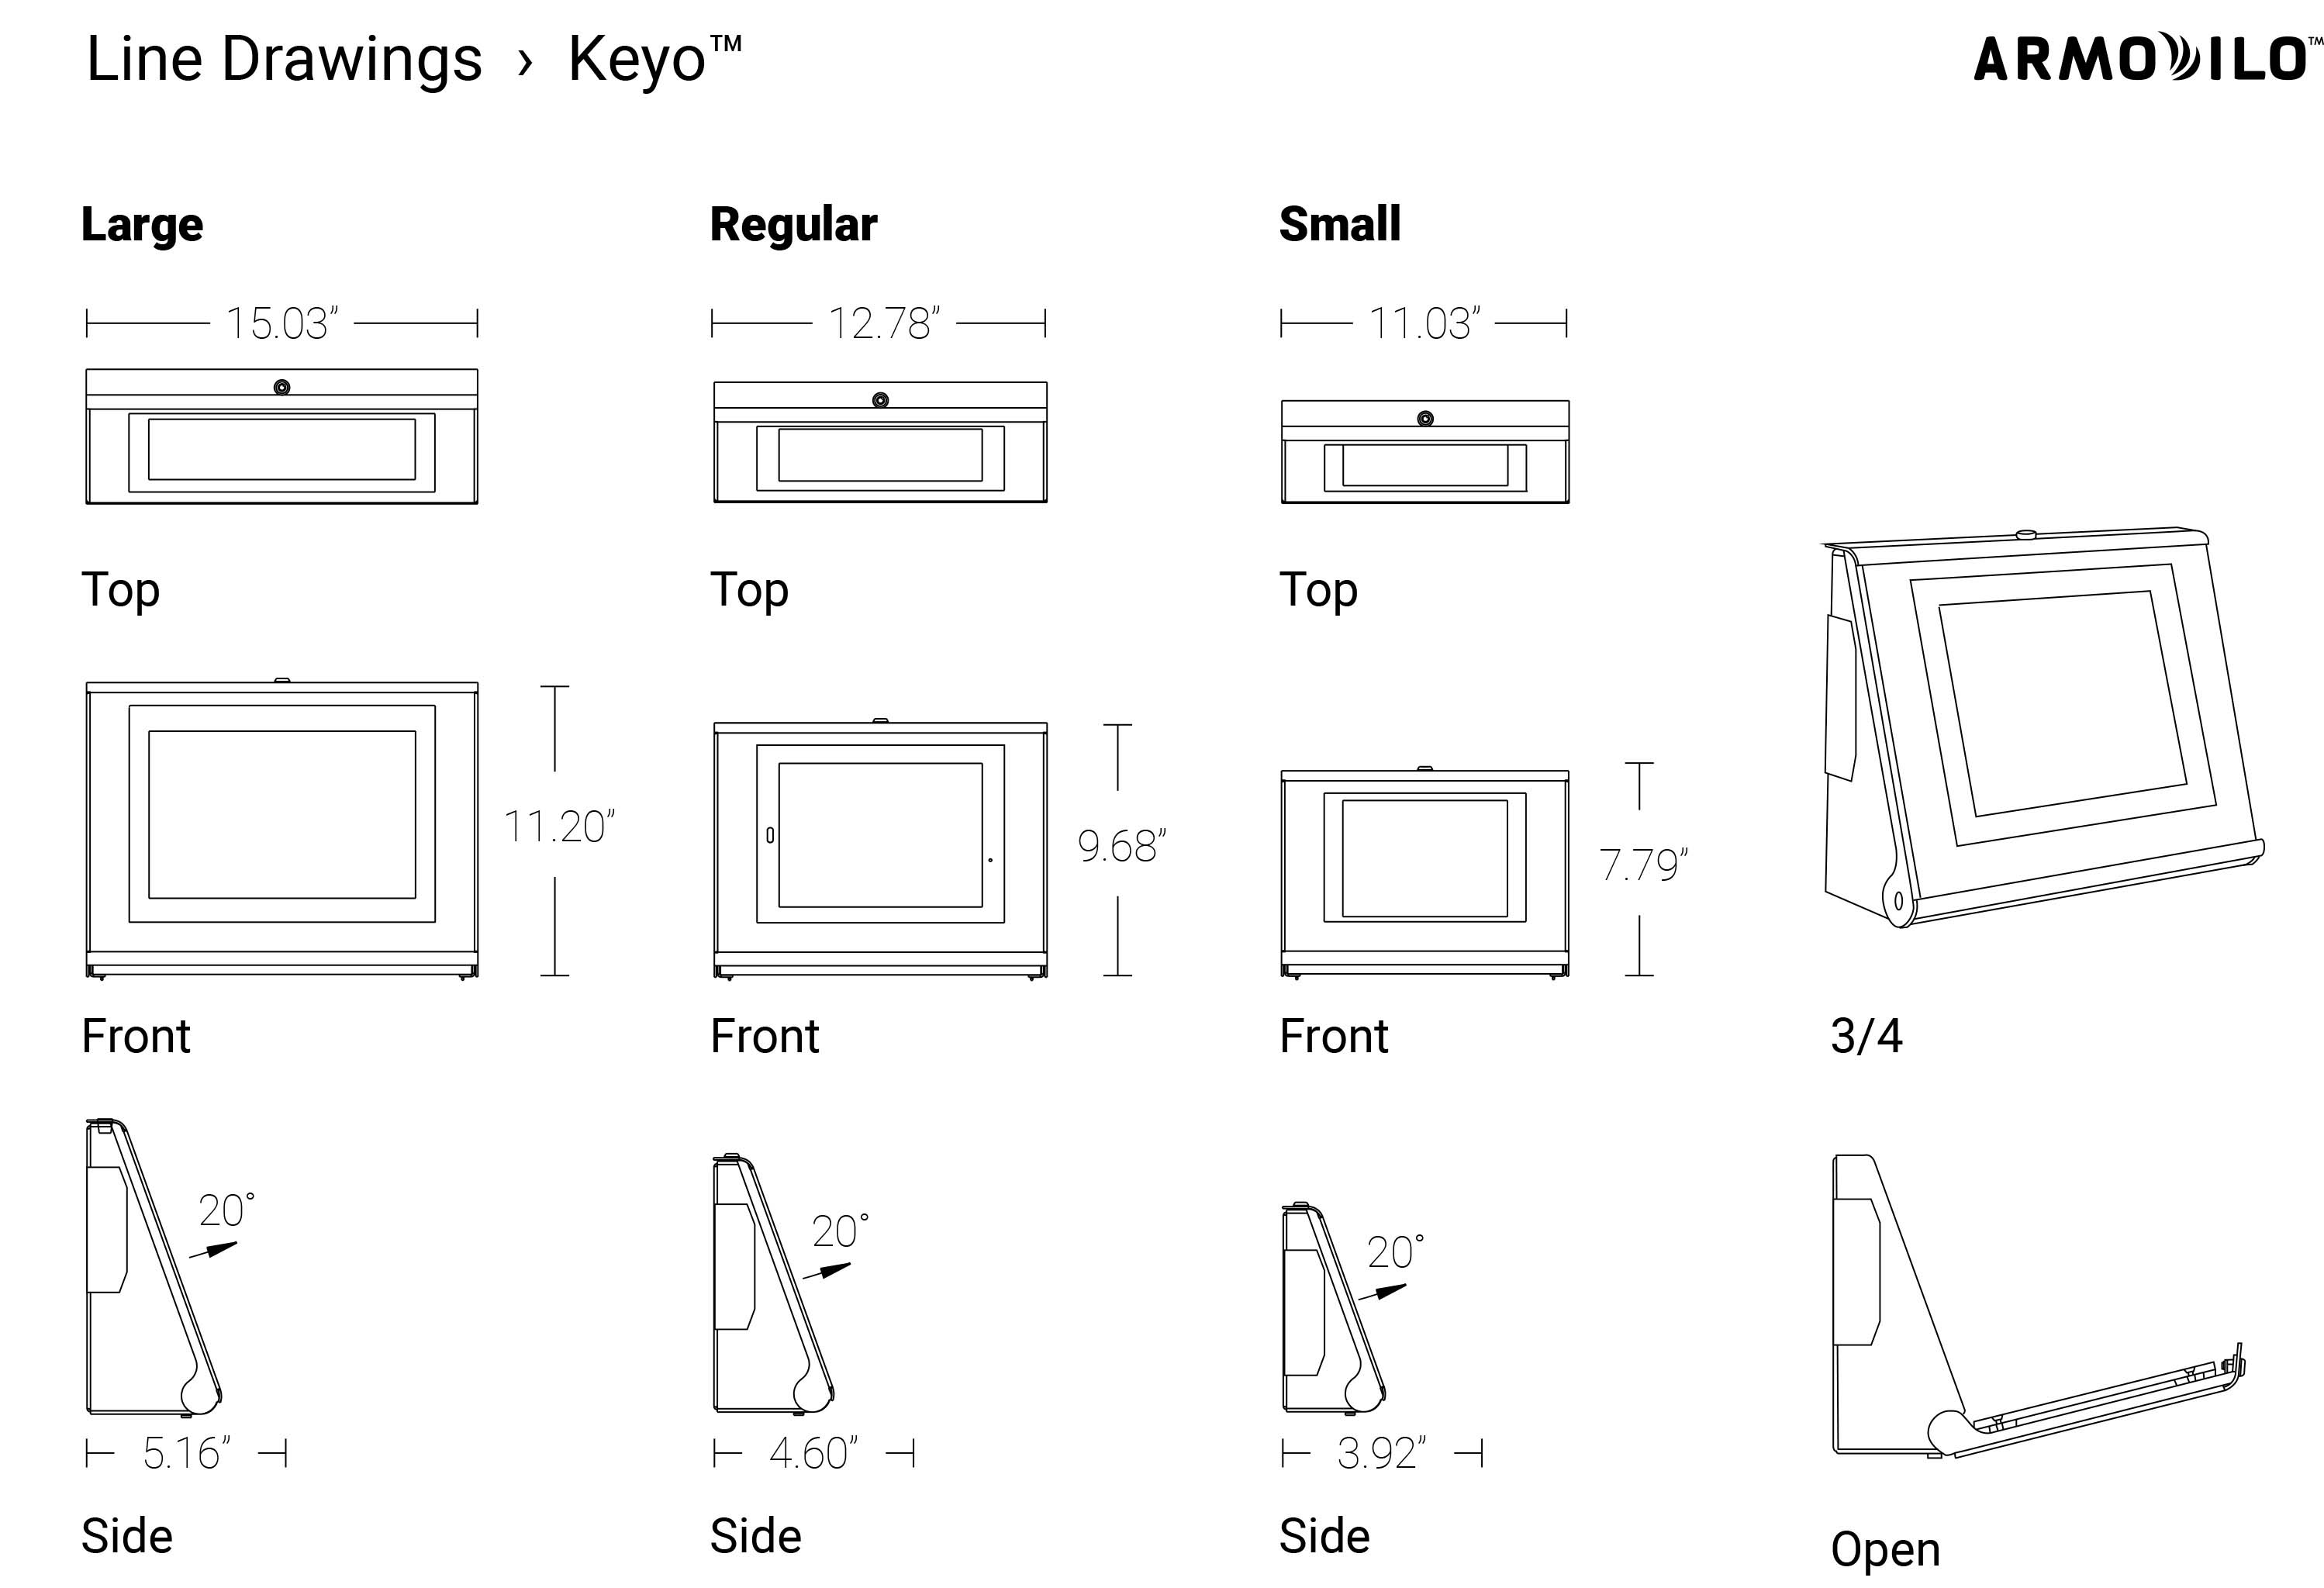 Line drawings of the Keyo enclosure, showing the three sizes and top, front, and side views.